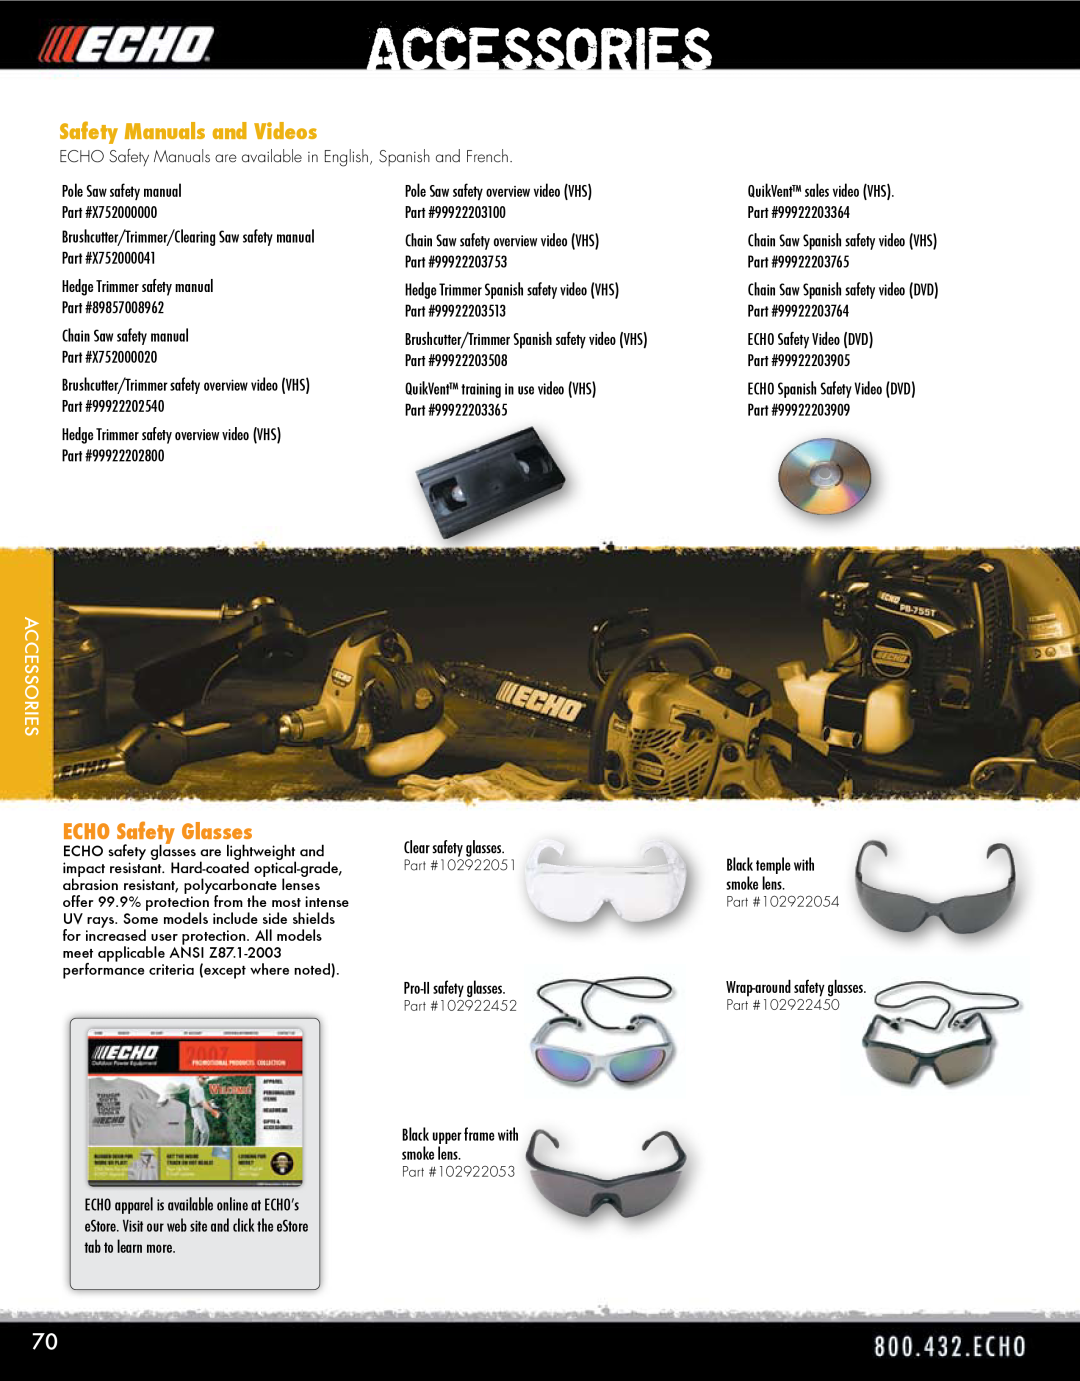 Echo HV-110XG manual Accessories, Safety Manuals and Videos, ECHO Safety Glasses 